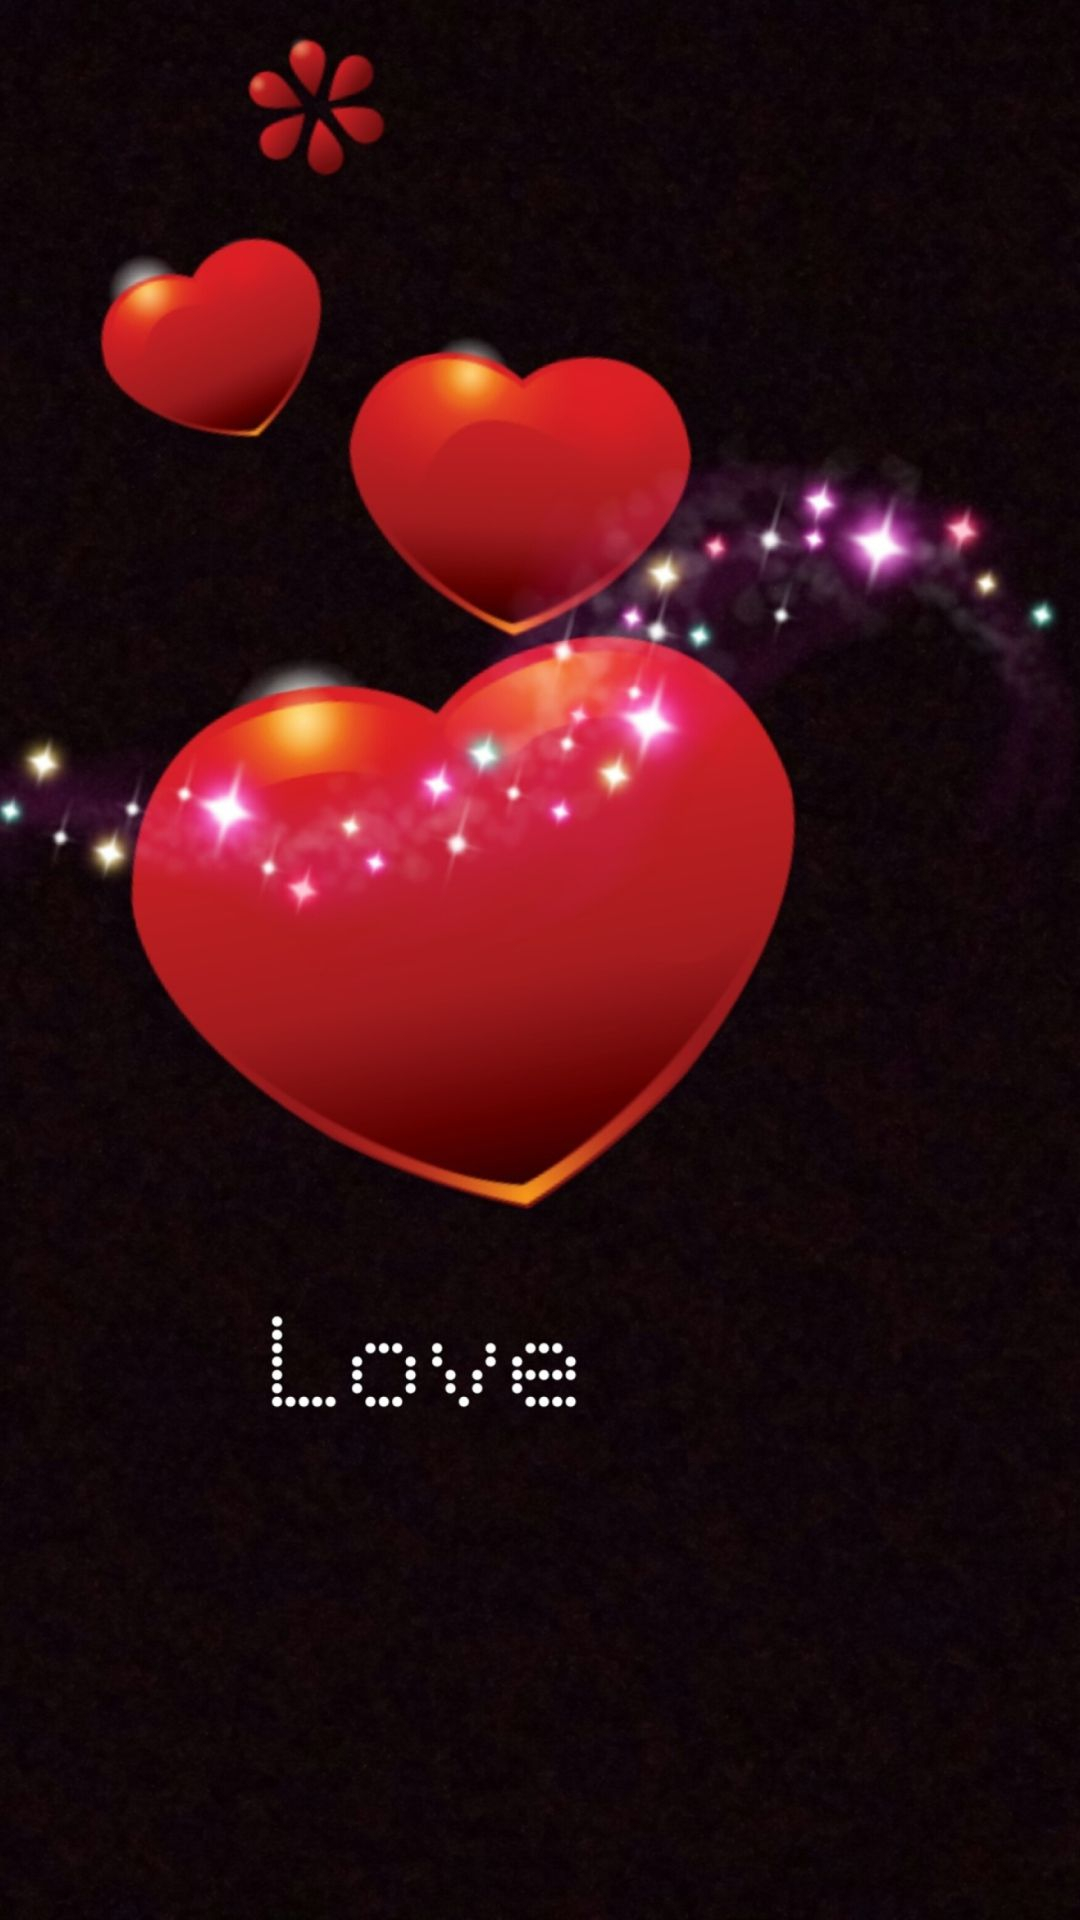 1080x1920 Background Red Heart Wallpaper